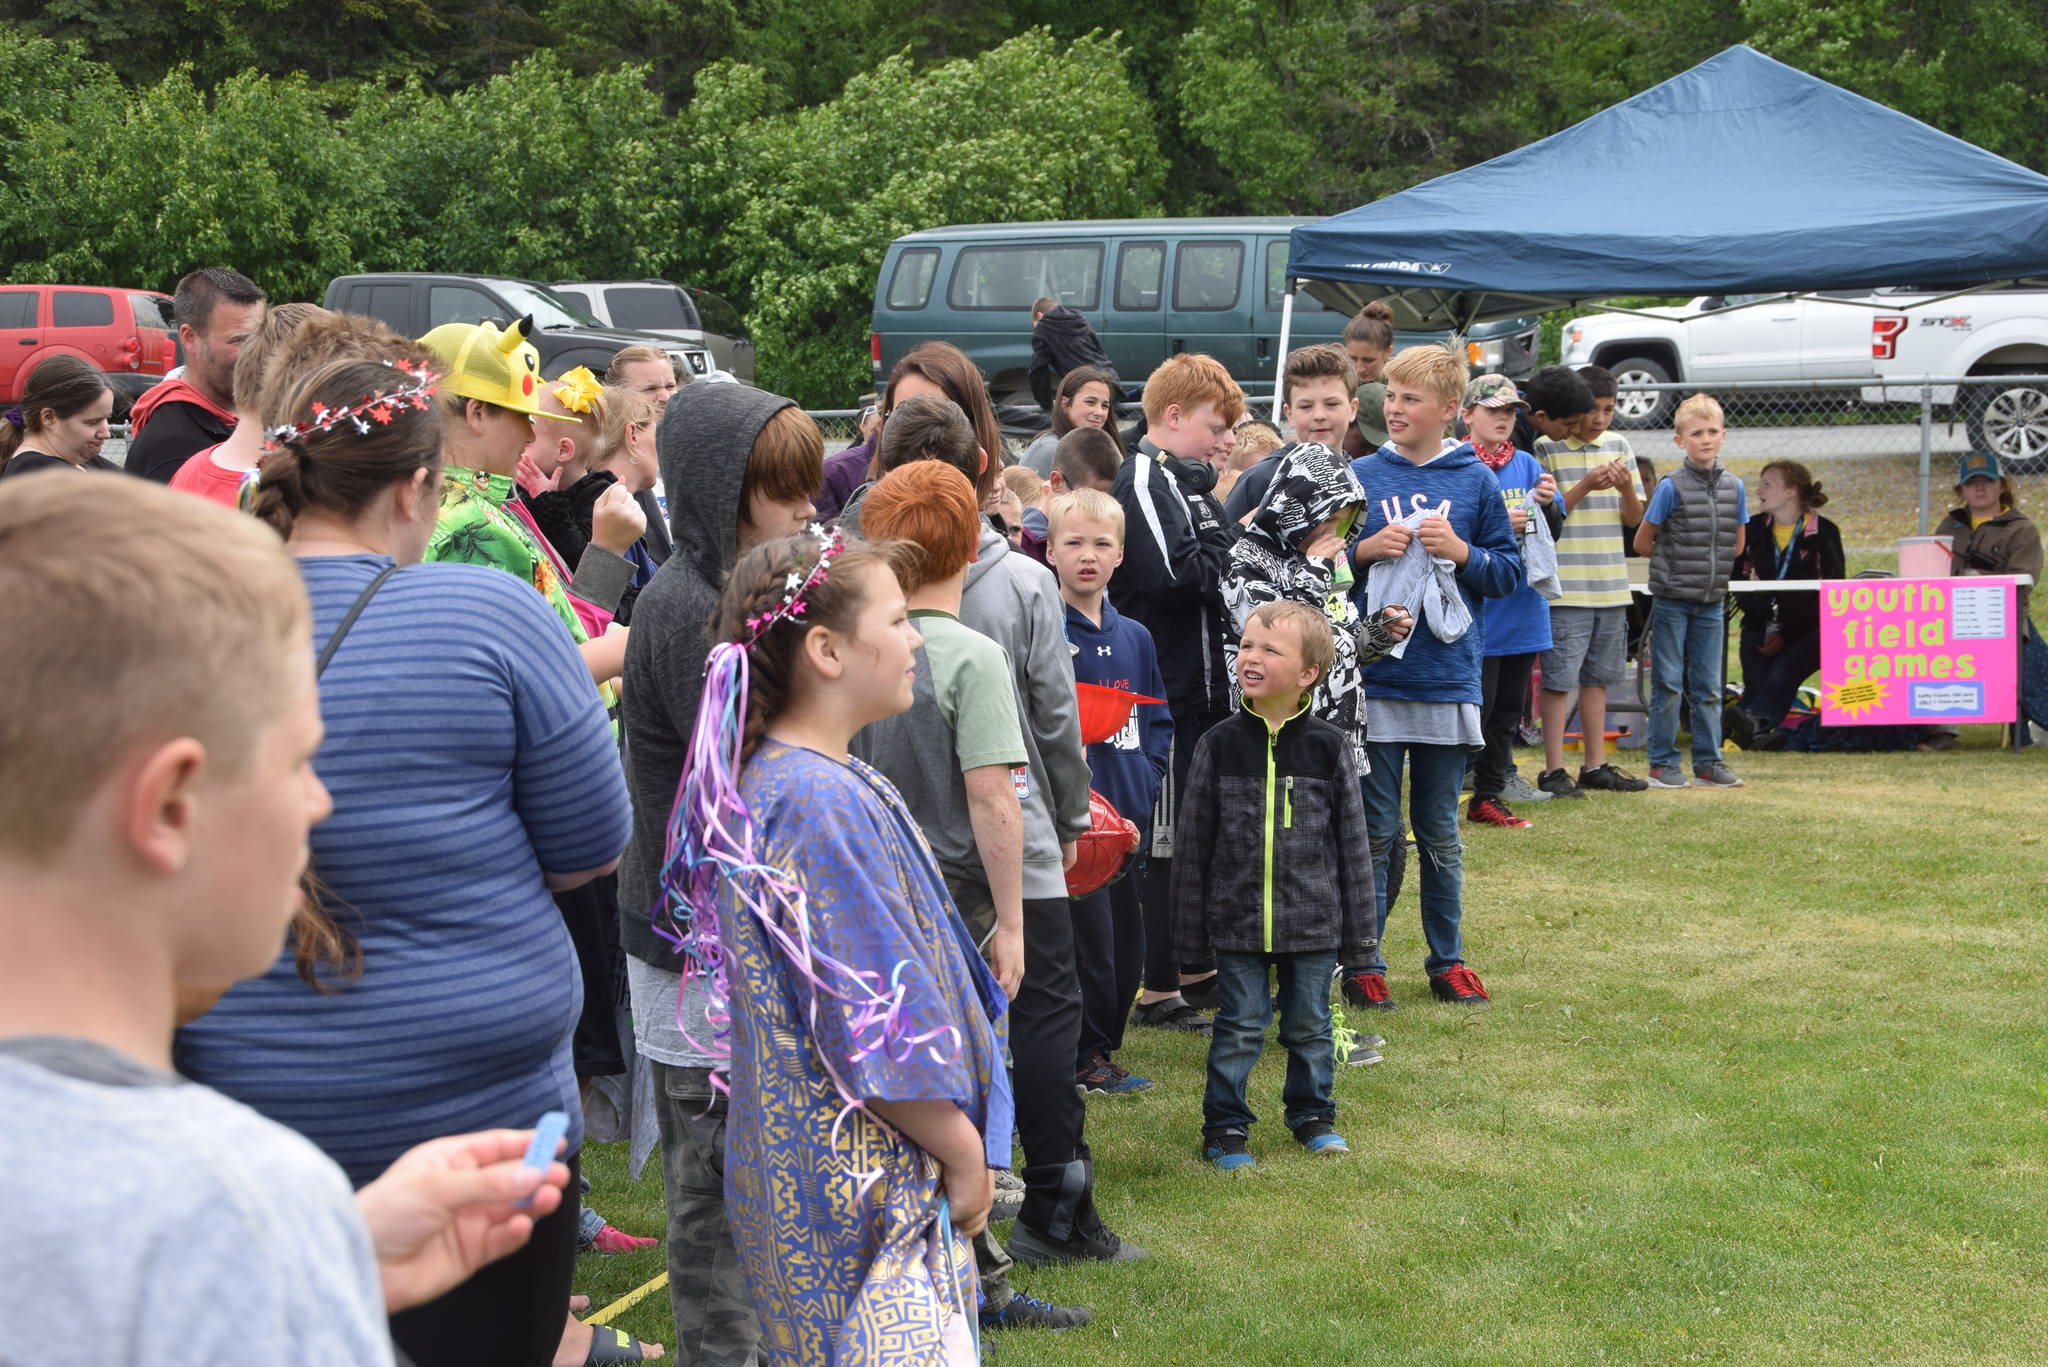 Kids wait to hear the winners of the bike raffle during the Family Fun in the Midnight Sun festival at the North Peninsula Recreation Center in Nikiski, Alaska, on June 15, 2019. (Peninsula Clarion file)